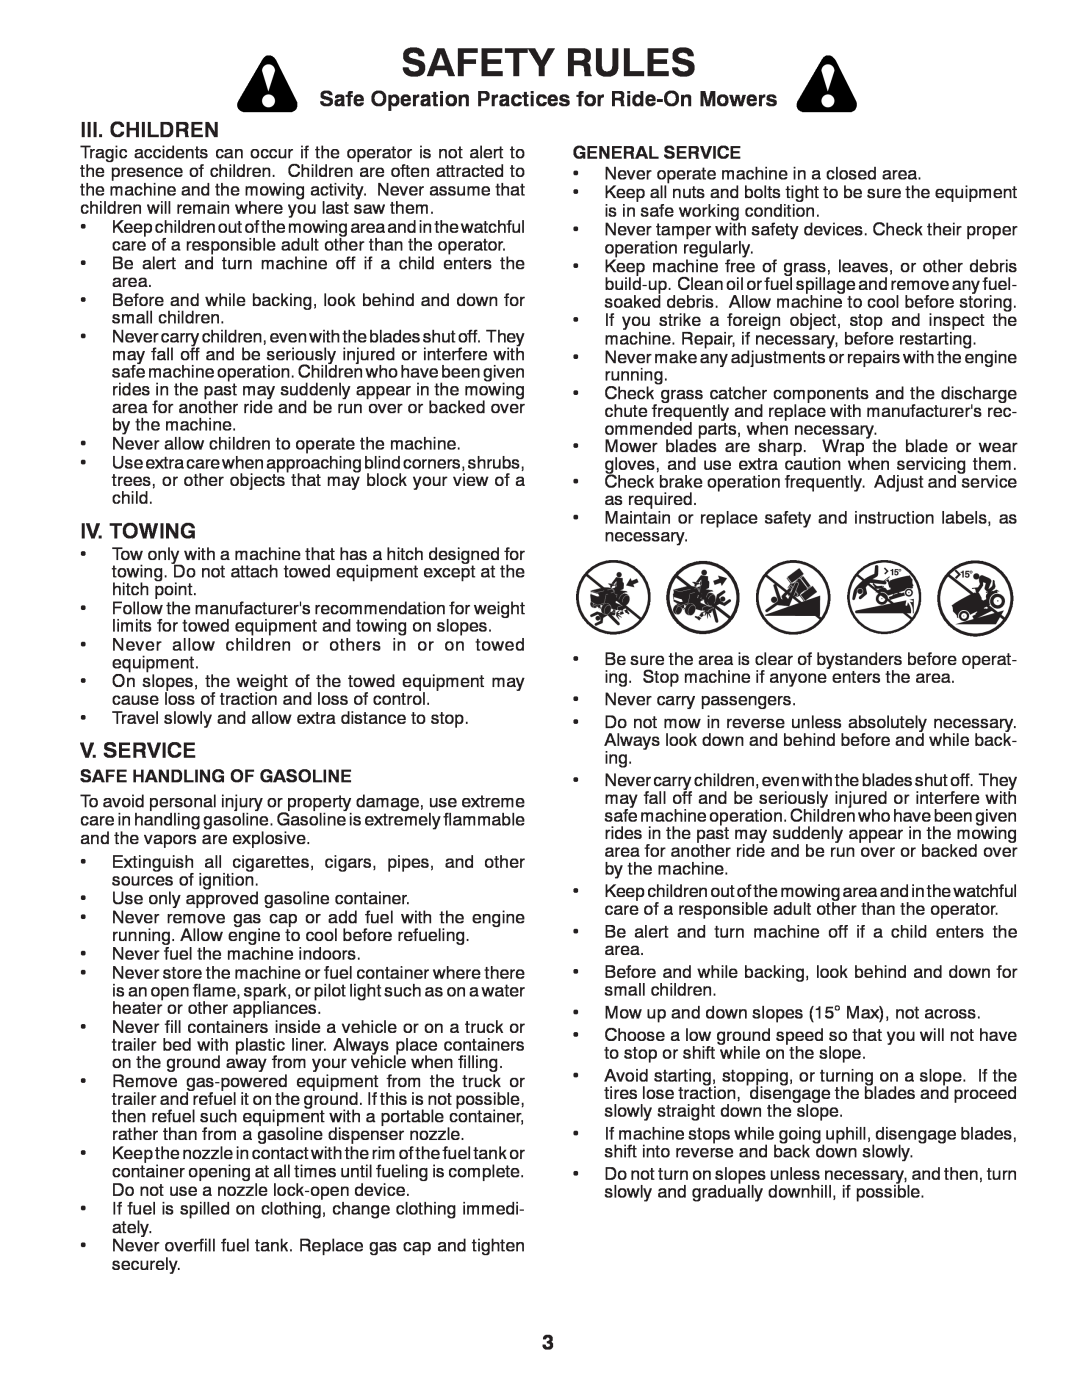 Poulan 96042007202, 435712 Safety Rules, Safe Operation Practices for Ride-OnMowers, Iii. Children, Iv. Towing, V. Service 